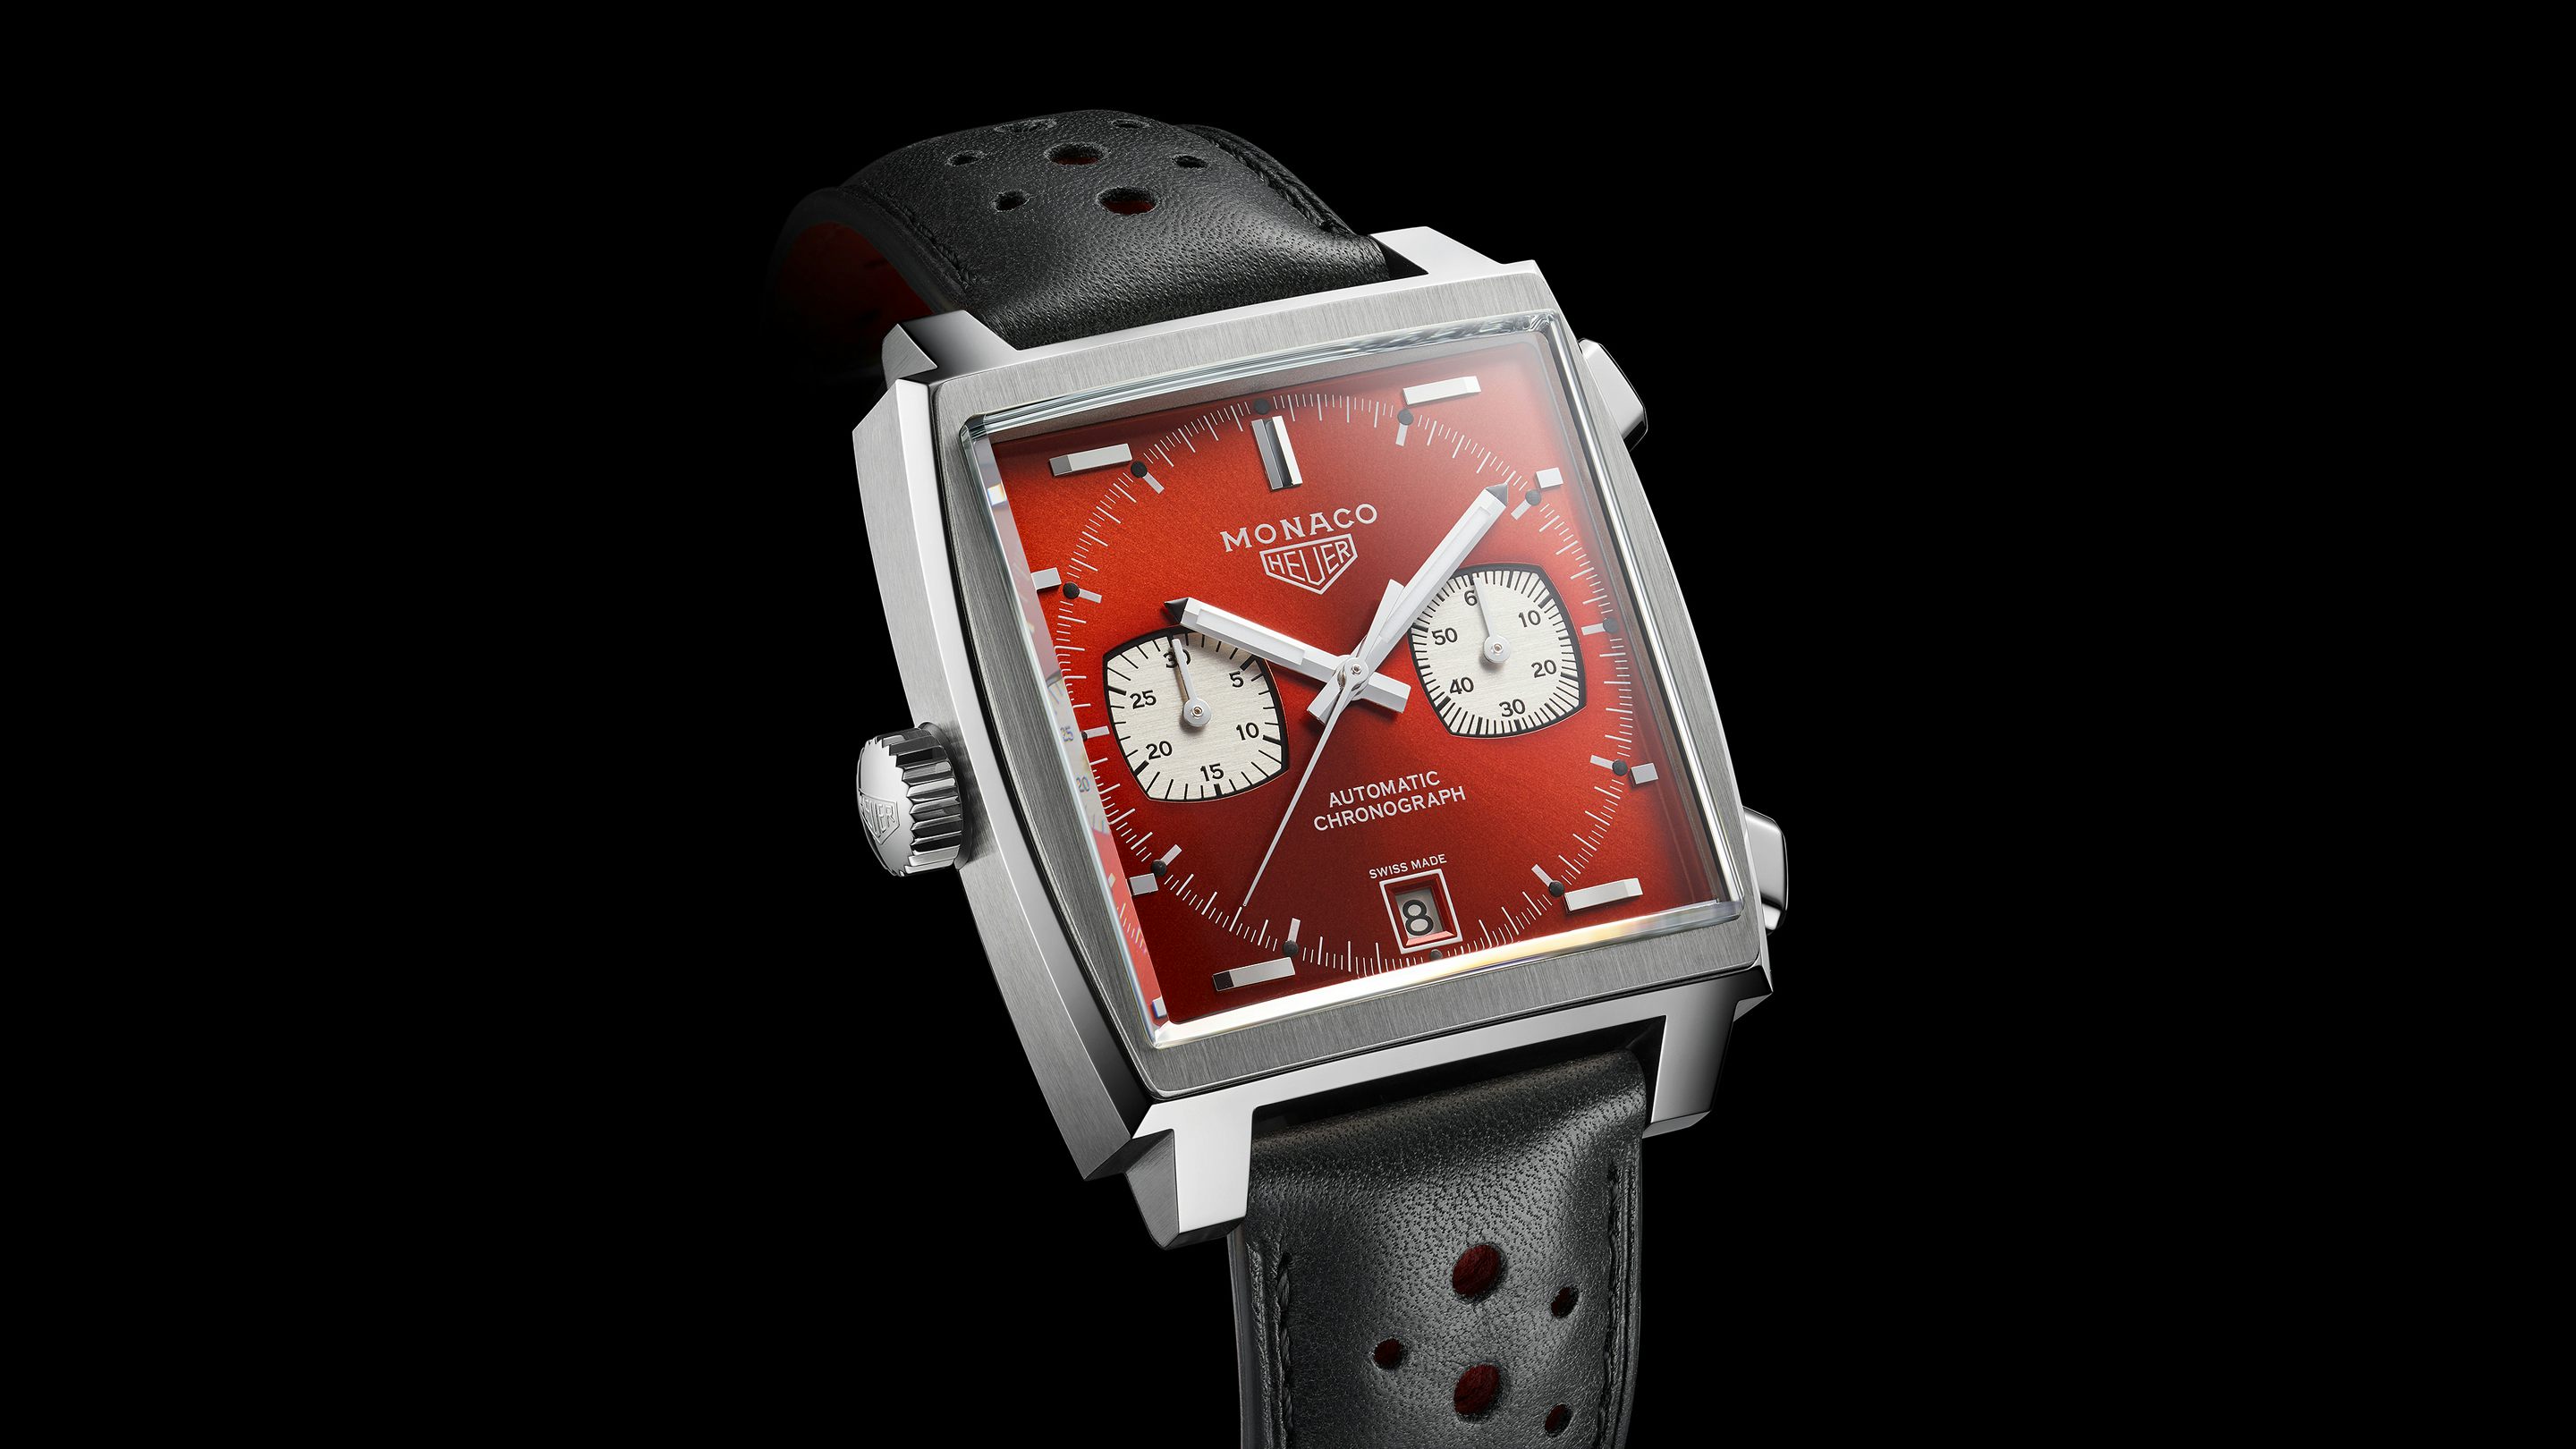 Introducing: The TAG Heuer Monaco 1979-1989 Limited Edition - Hodinkee